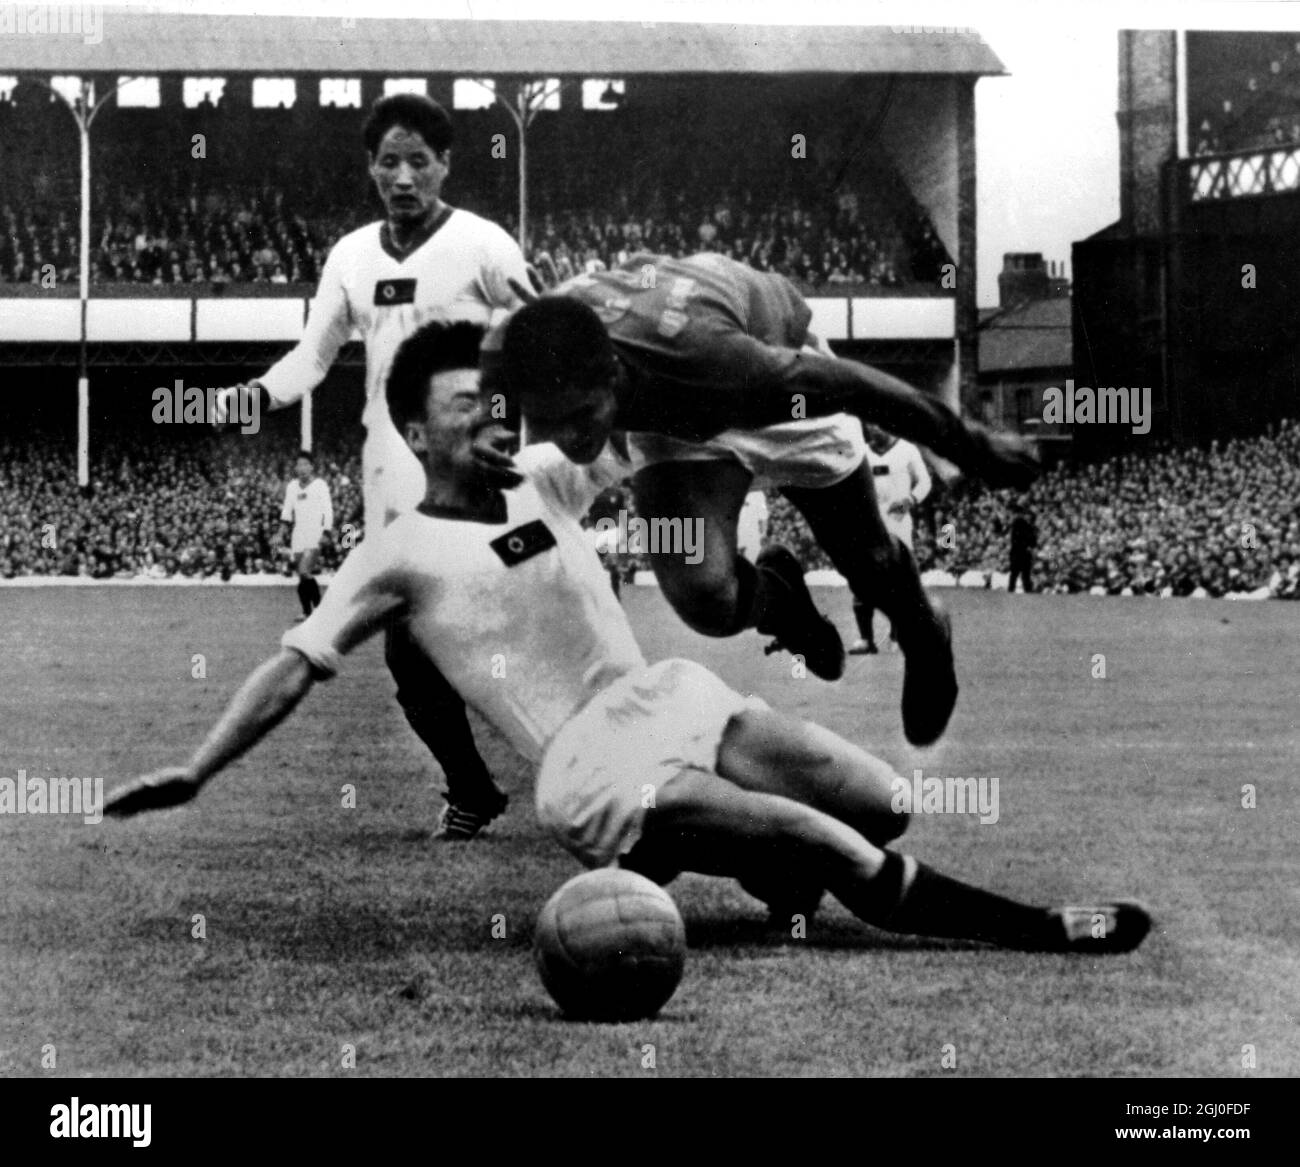 1966 World Cup Portugal v North Korea Portugal's Eusebio is fouled by North Korea's Rim Sun which resulted in a penalty during the World Cup quarter final match at Goodison Park. 23rd July 1966. Stock Photo